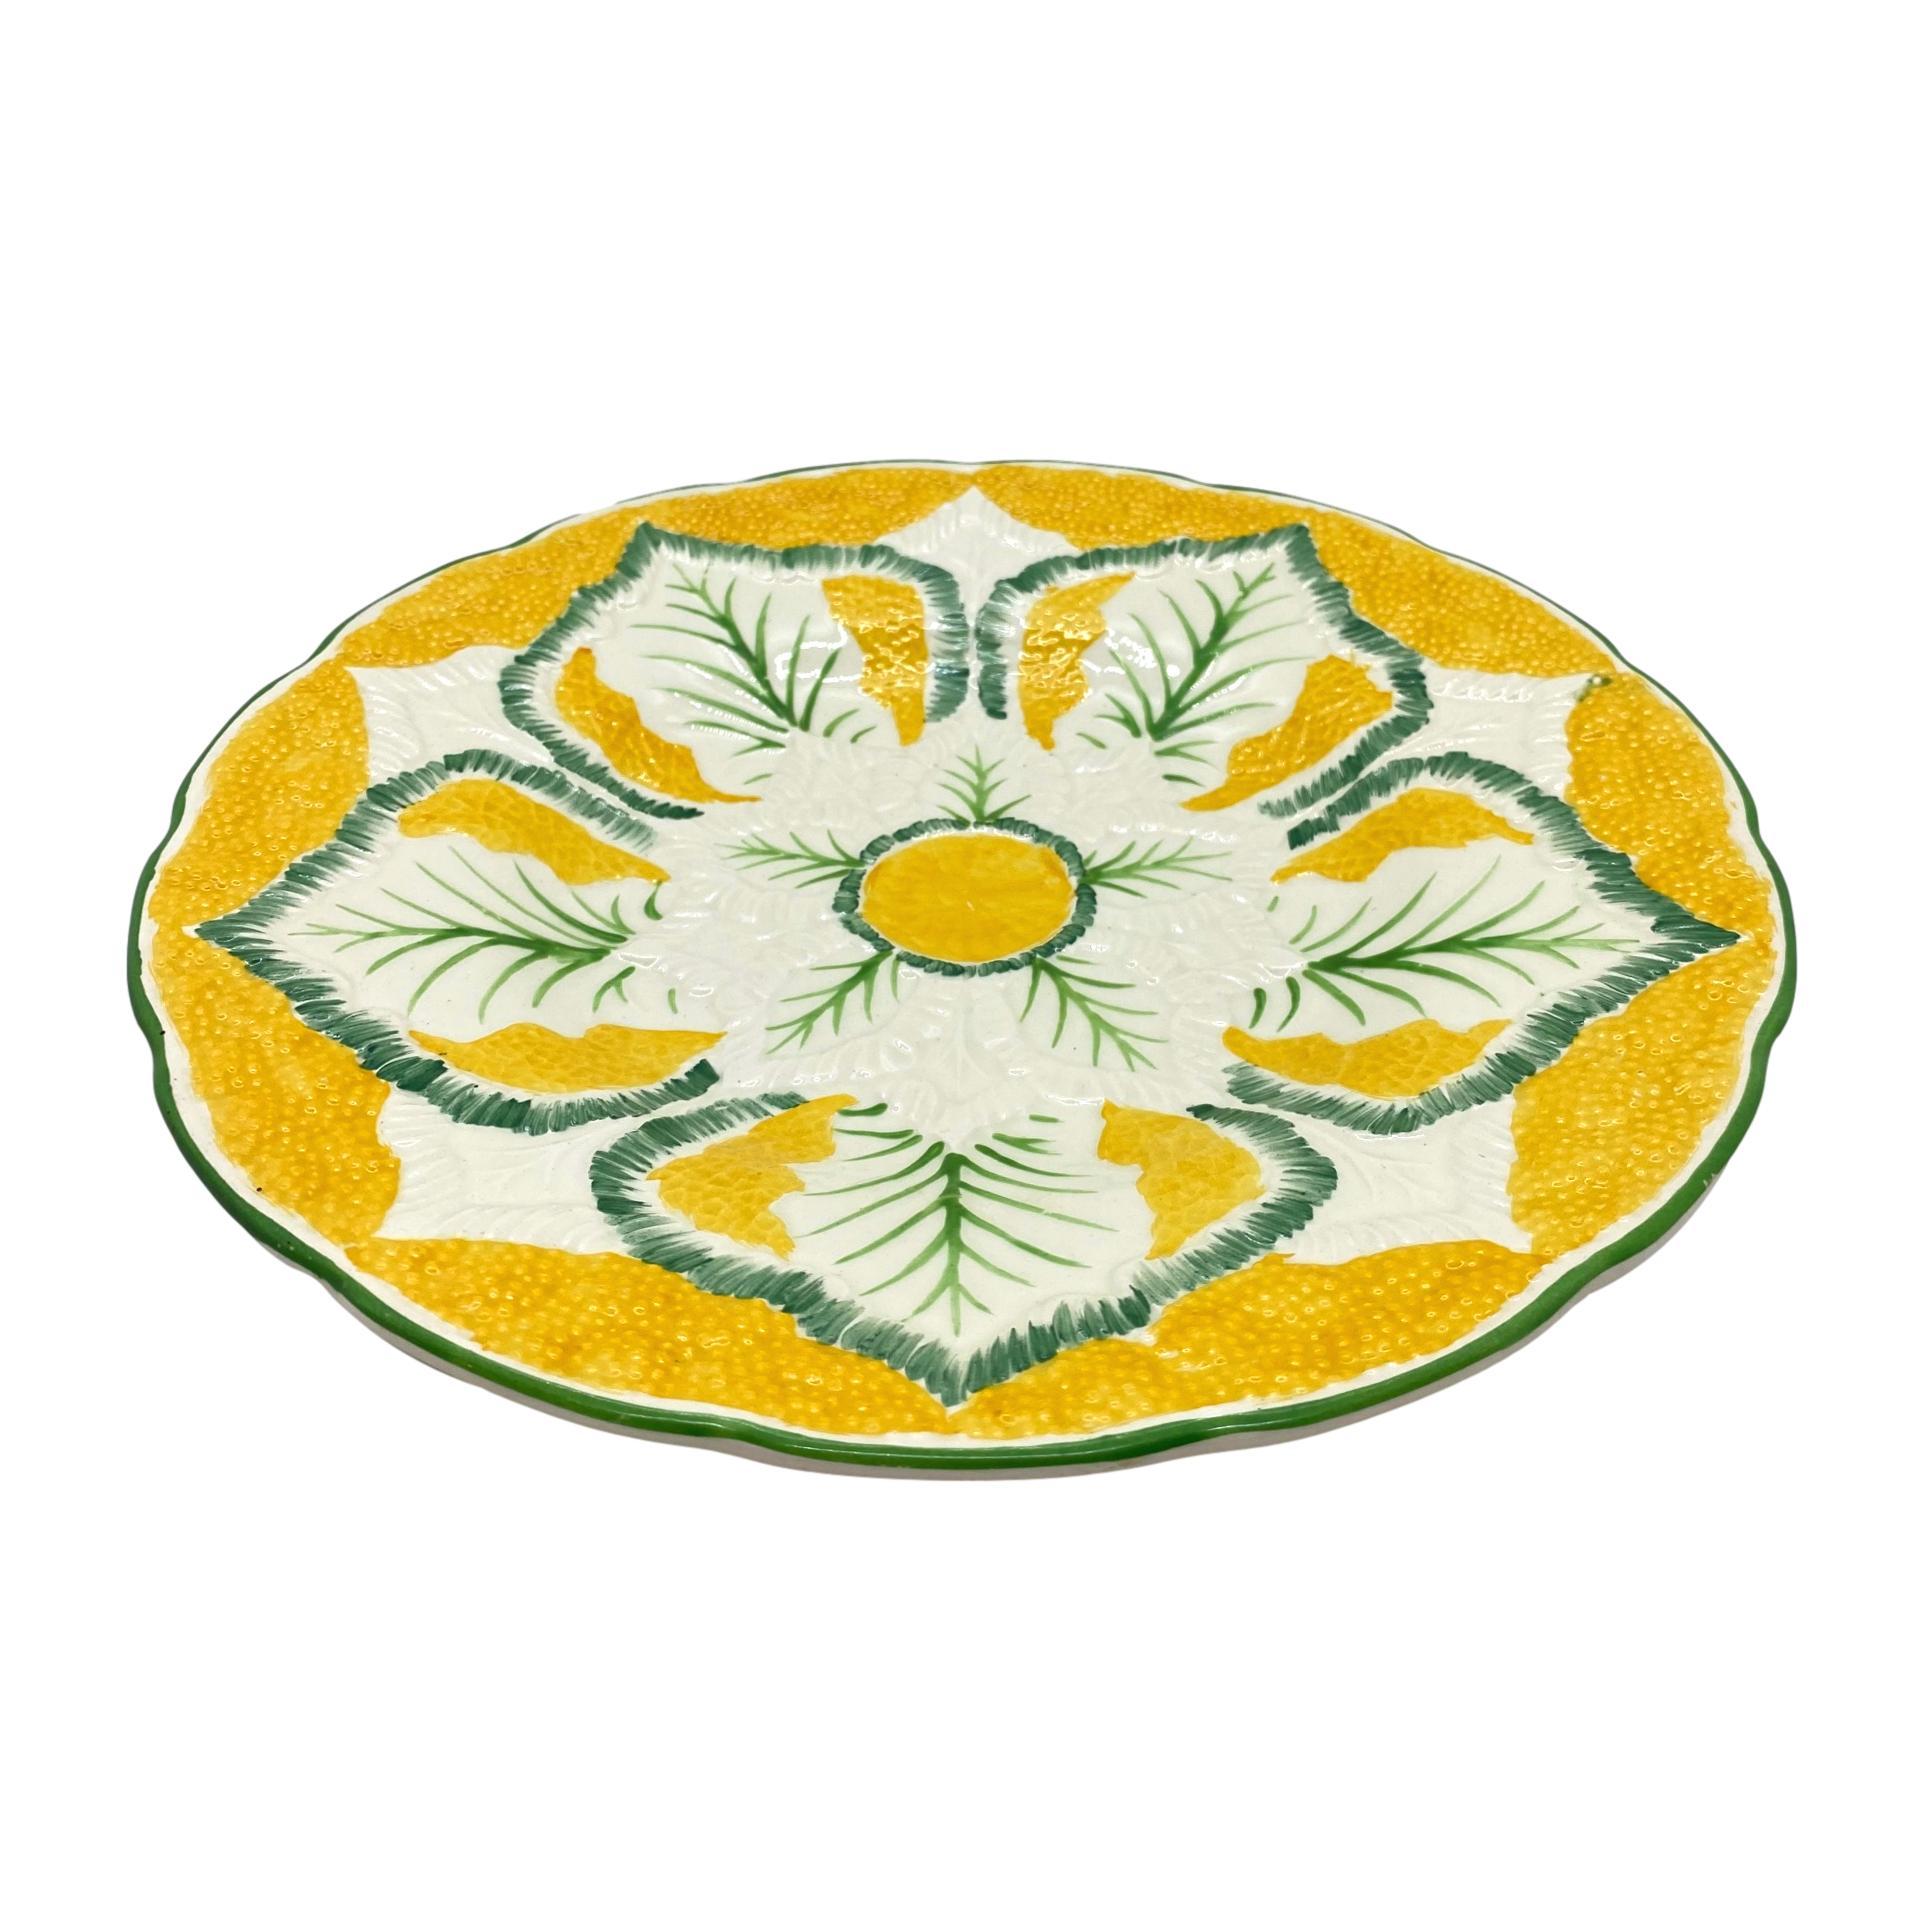 Wedgwood Majolica cauliflower pattern 9-in plate, molded as a stylized blooming cauliflower, on a vividly glazed yellow ground, the reverse with impressed marks: 'Wedgwood' and the firm's date code for November 1923,
English.
For nearly 30 years